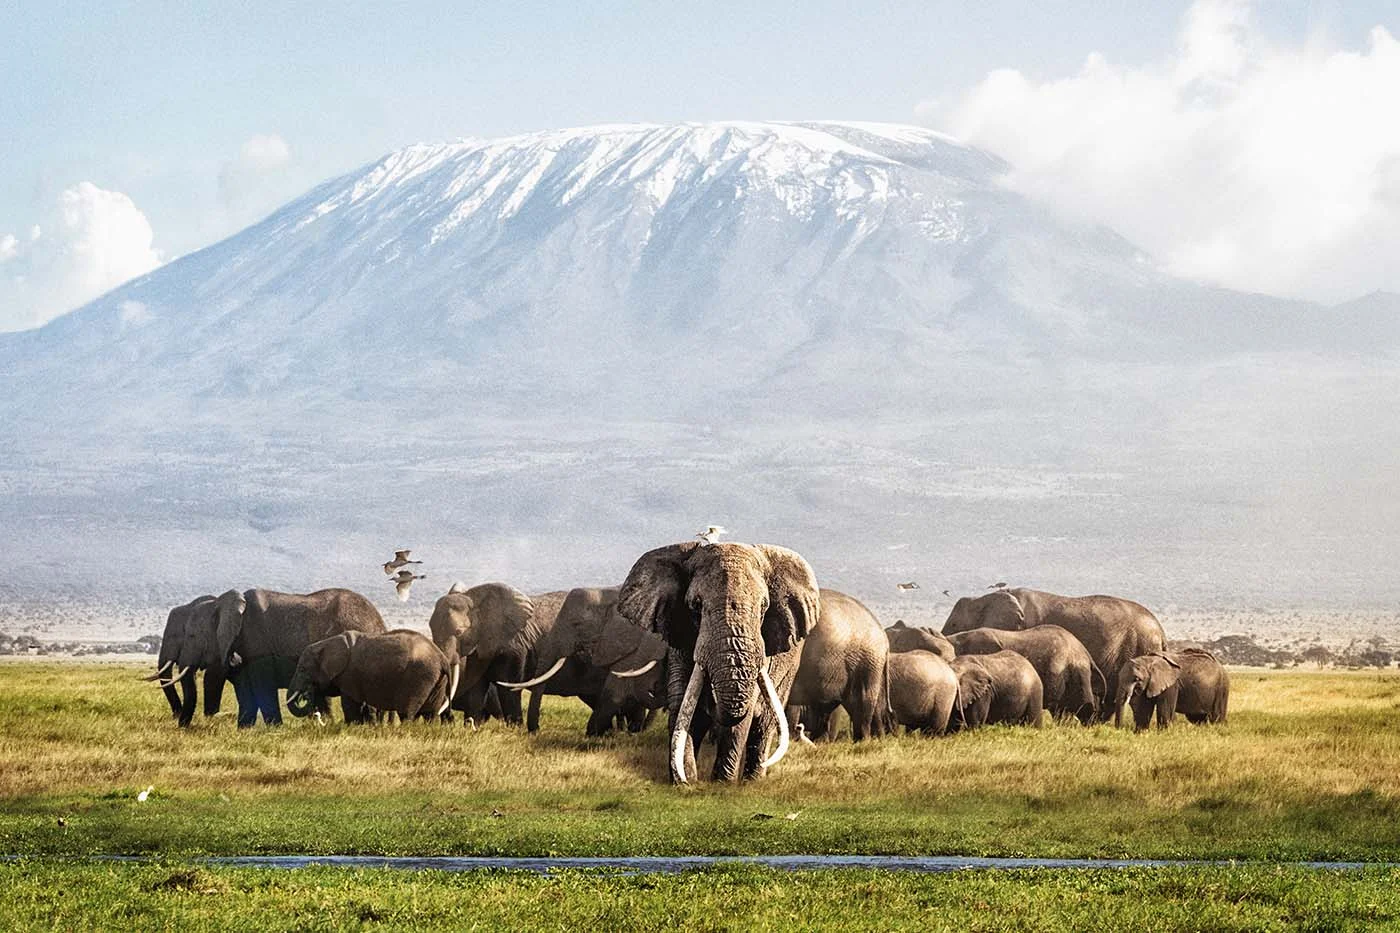 Famous big tusker bull elephant Tim with family herd in front of Mt. Kilimanjaro